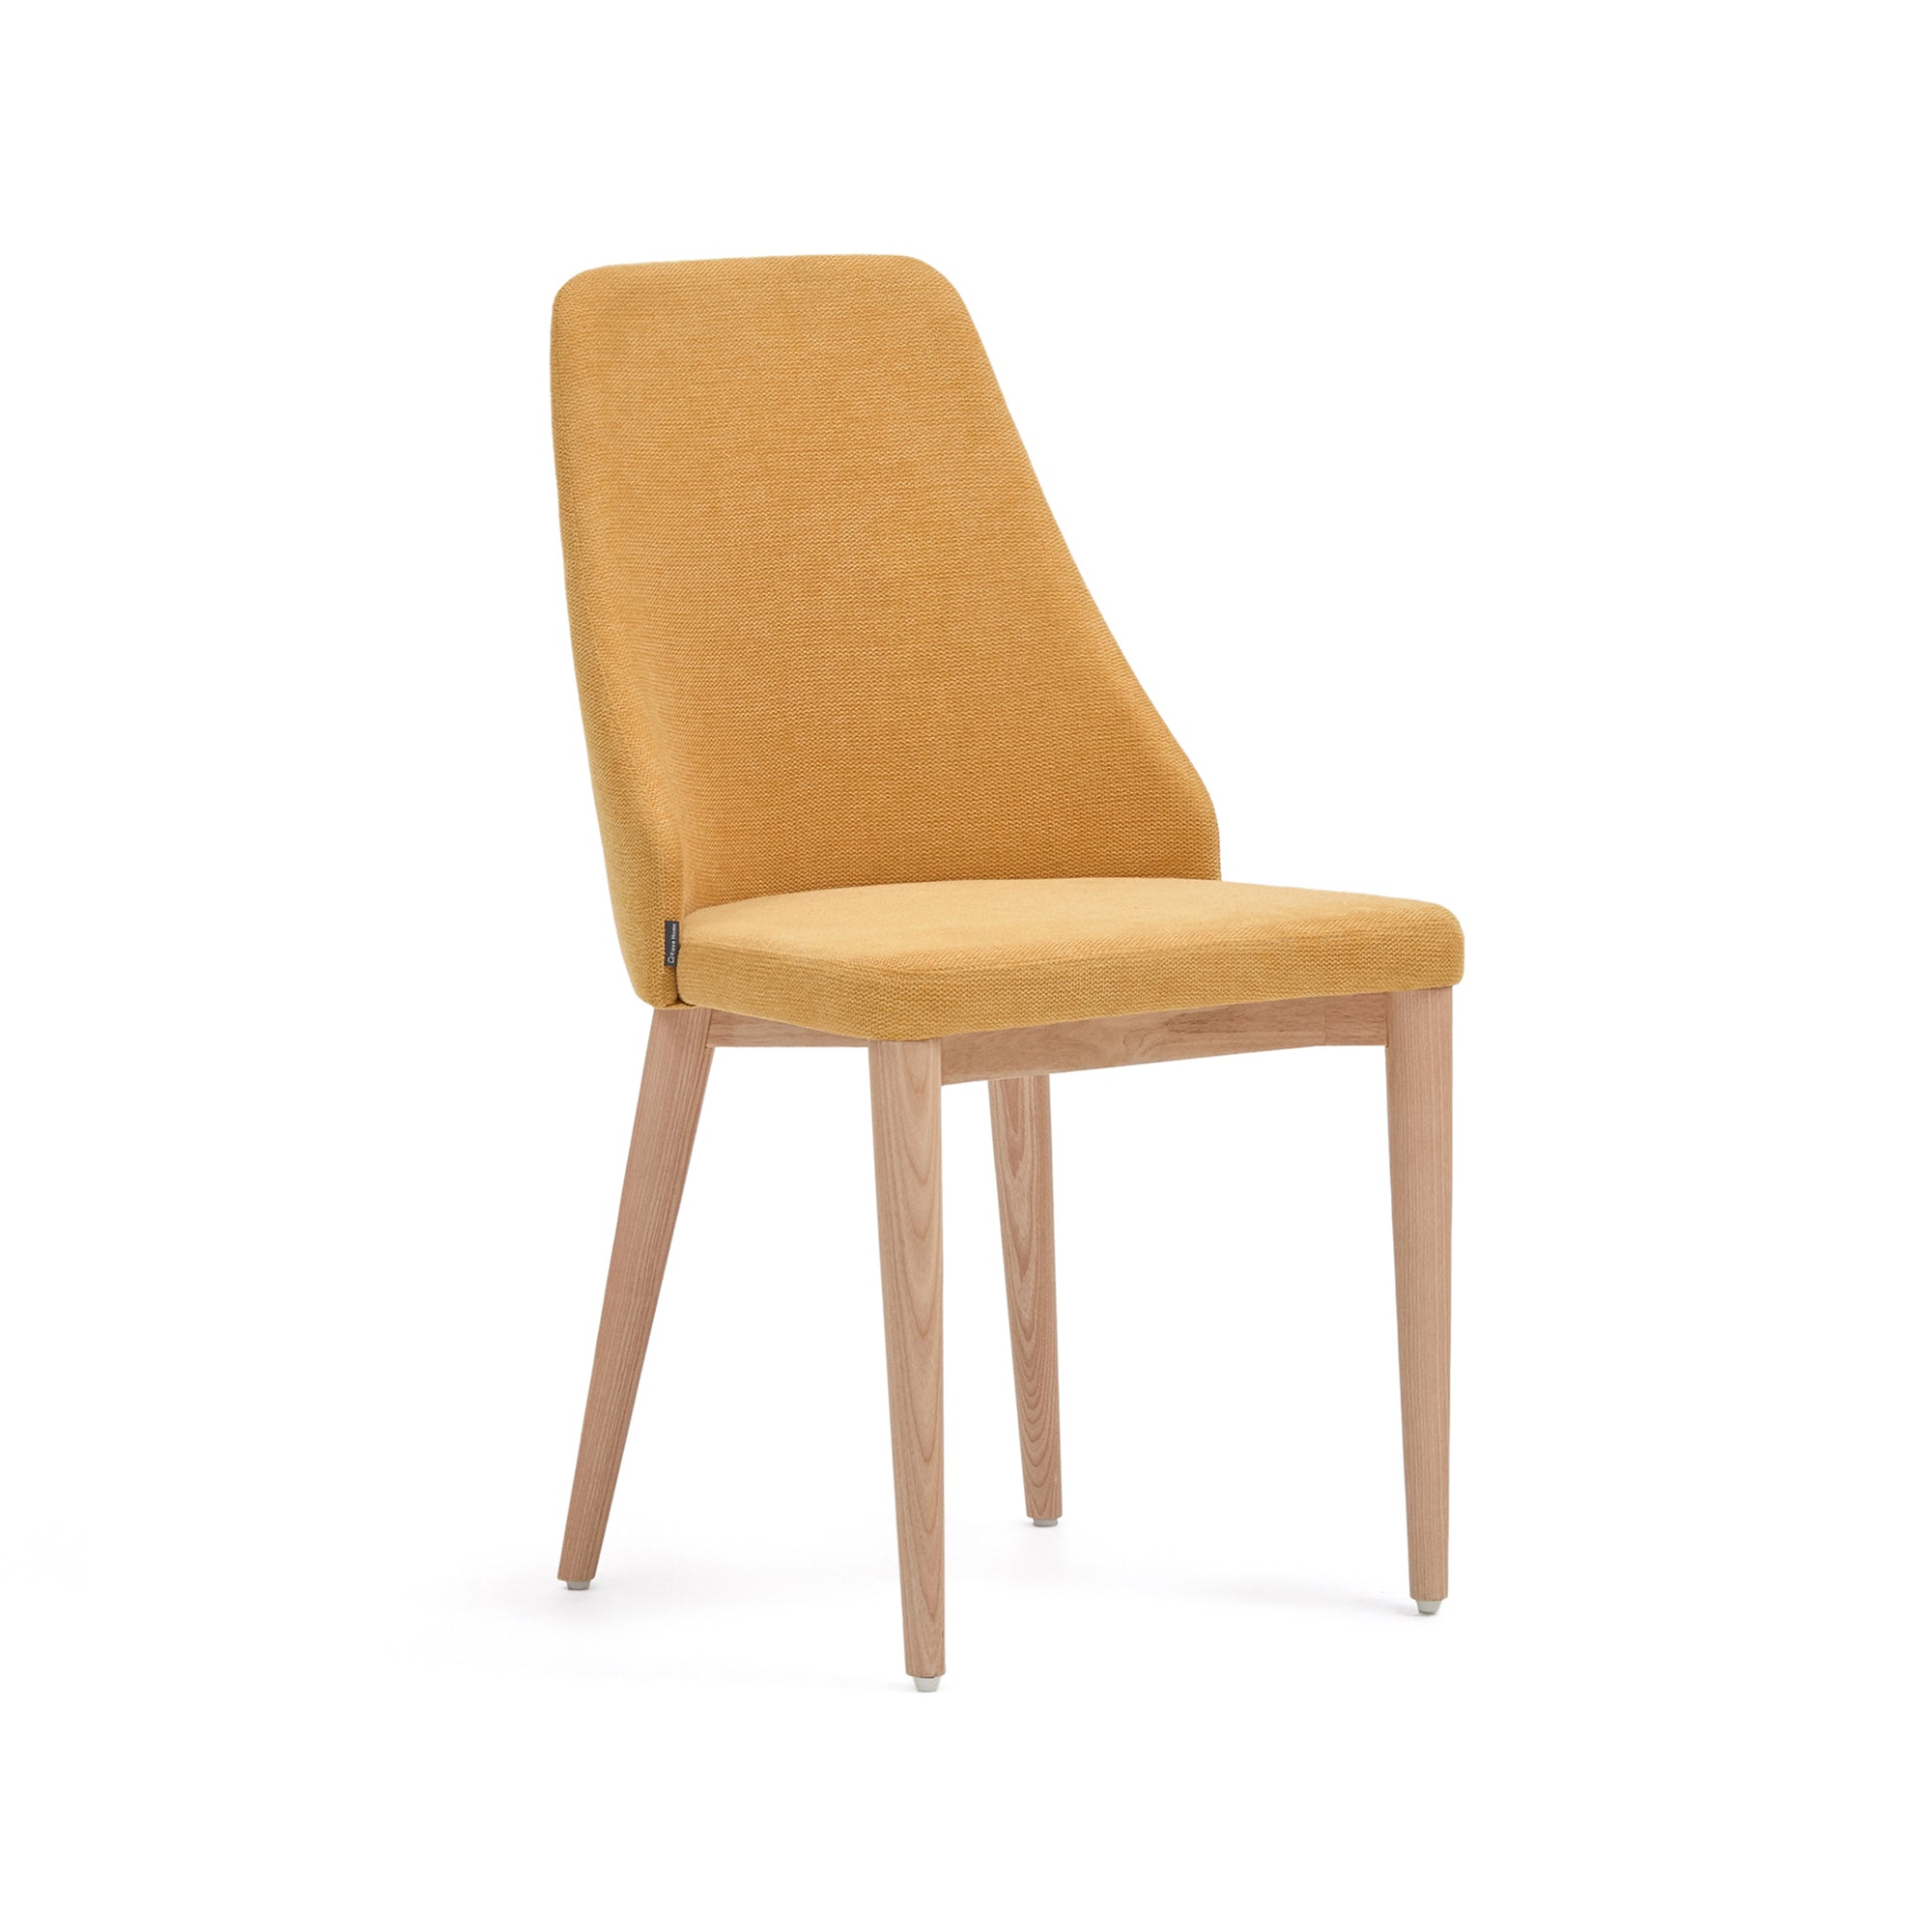 Rosie chair in mustard chenille with solid ash wood legs in a natural finish